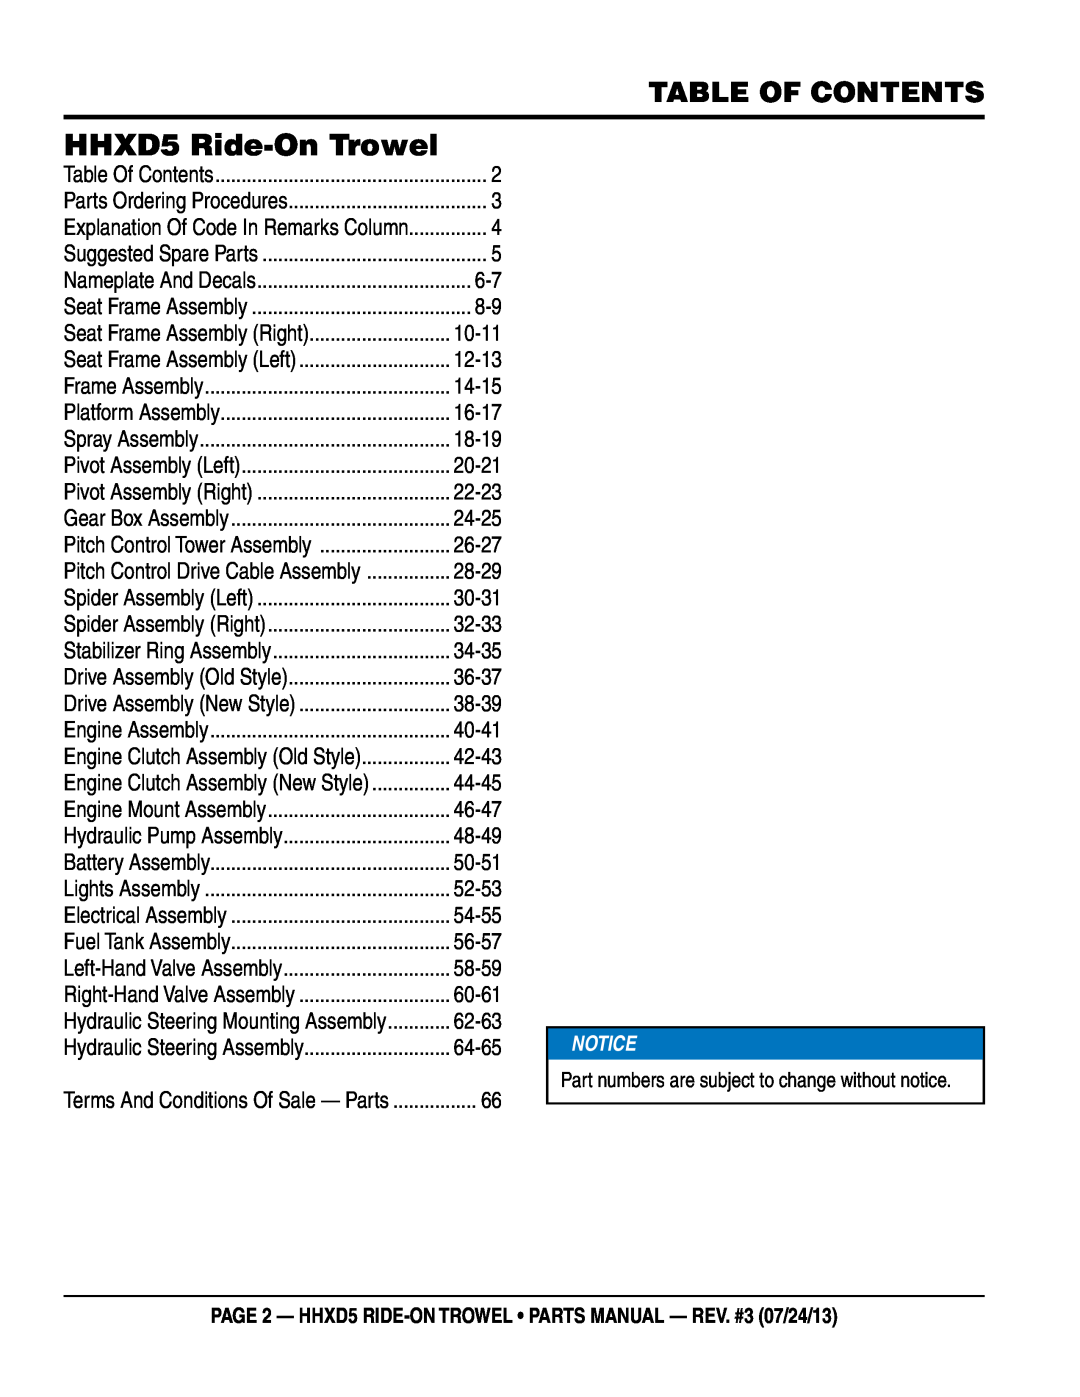 Multiquip HHSD5 Table of Contents, page 2 - HHXD5 RIDE-ON TROWEL parts manual - rev. #3 07/24/13, HHXD5 Ride-On Trowel 